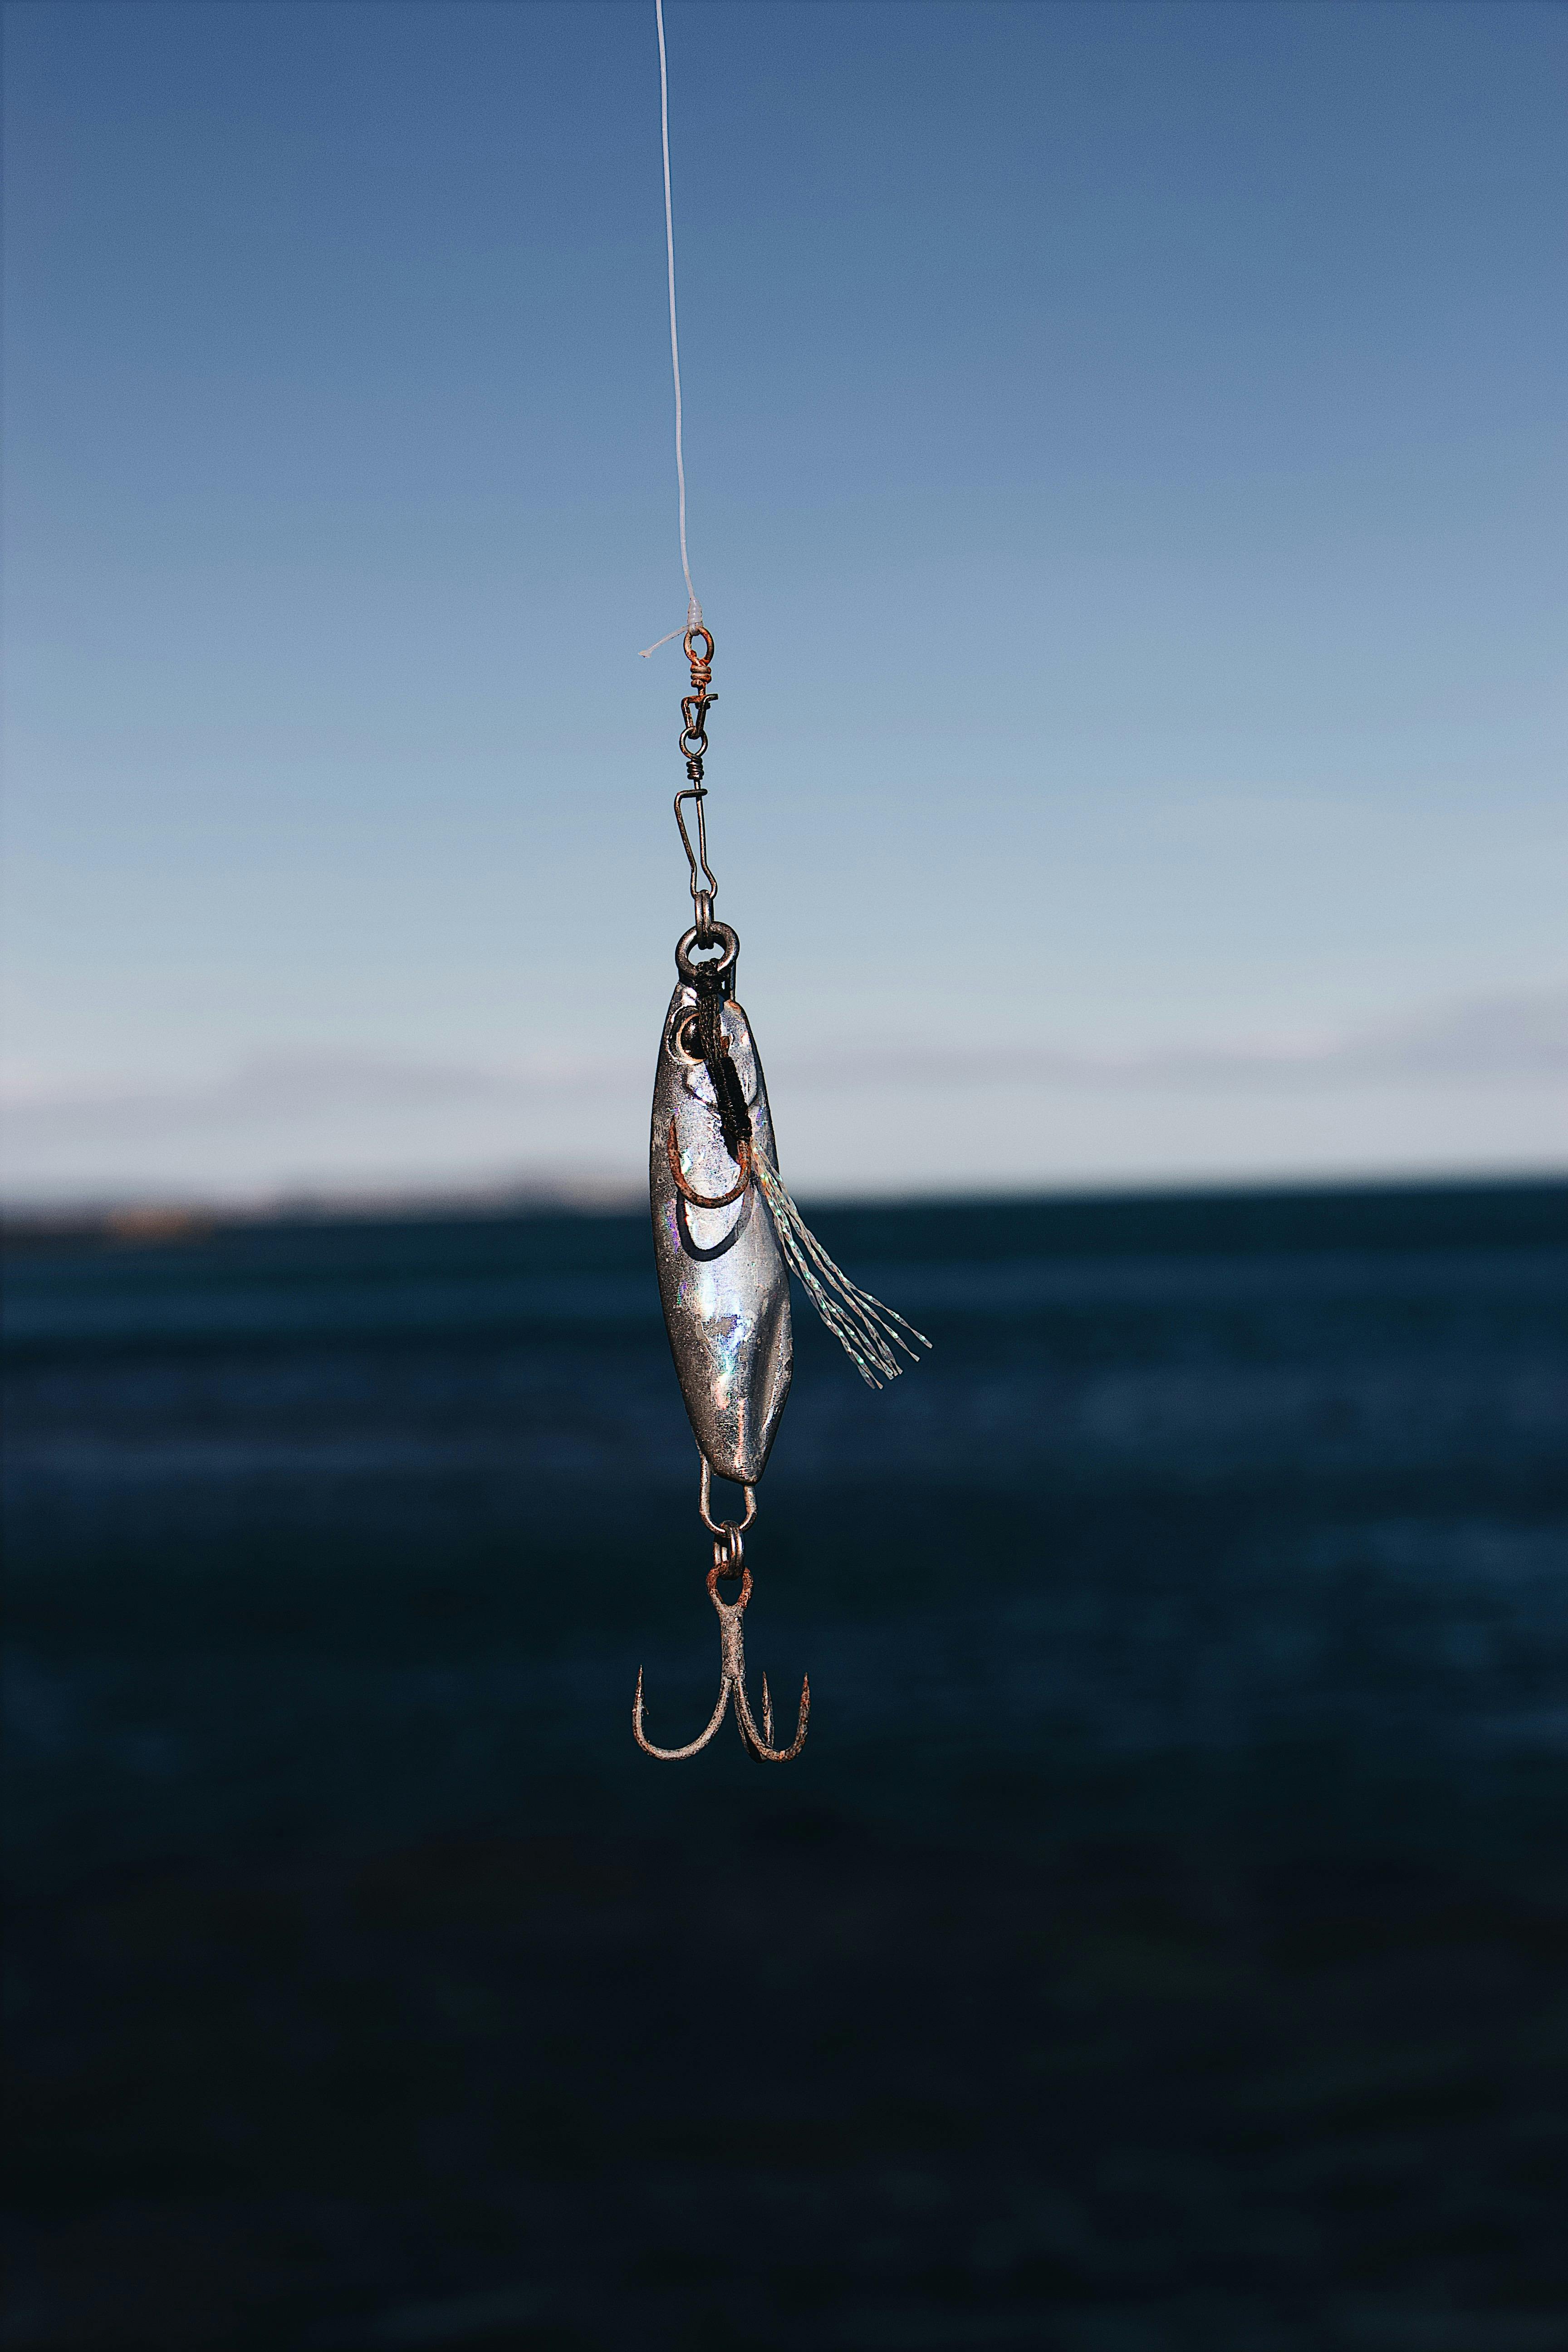 Fishing Photos, Download The BEST Free Fishing Stock Photos & HD Images